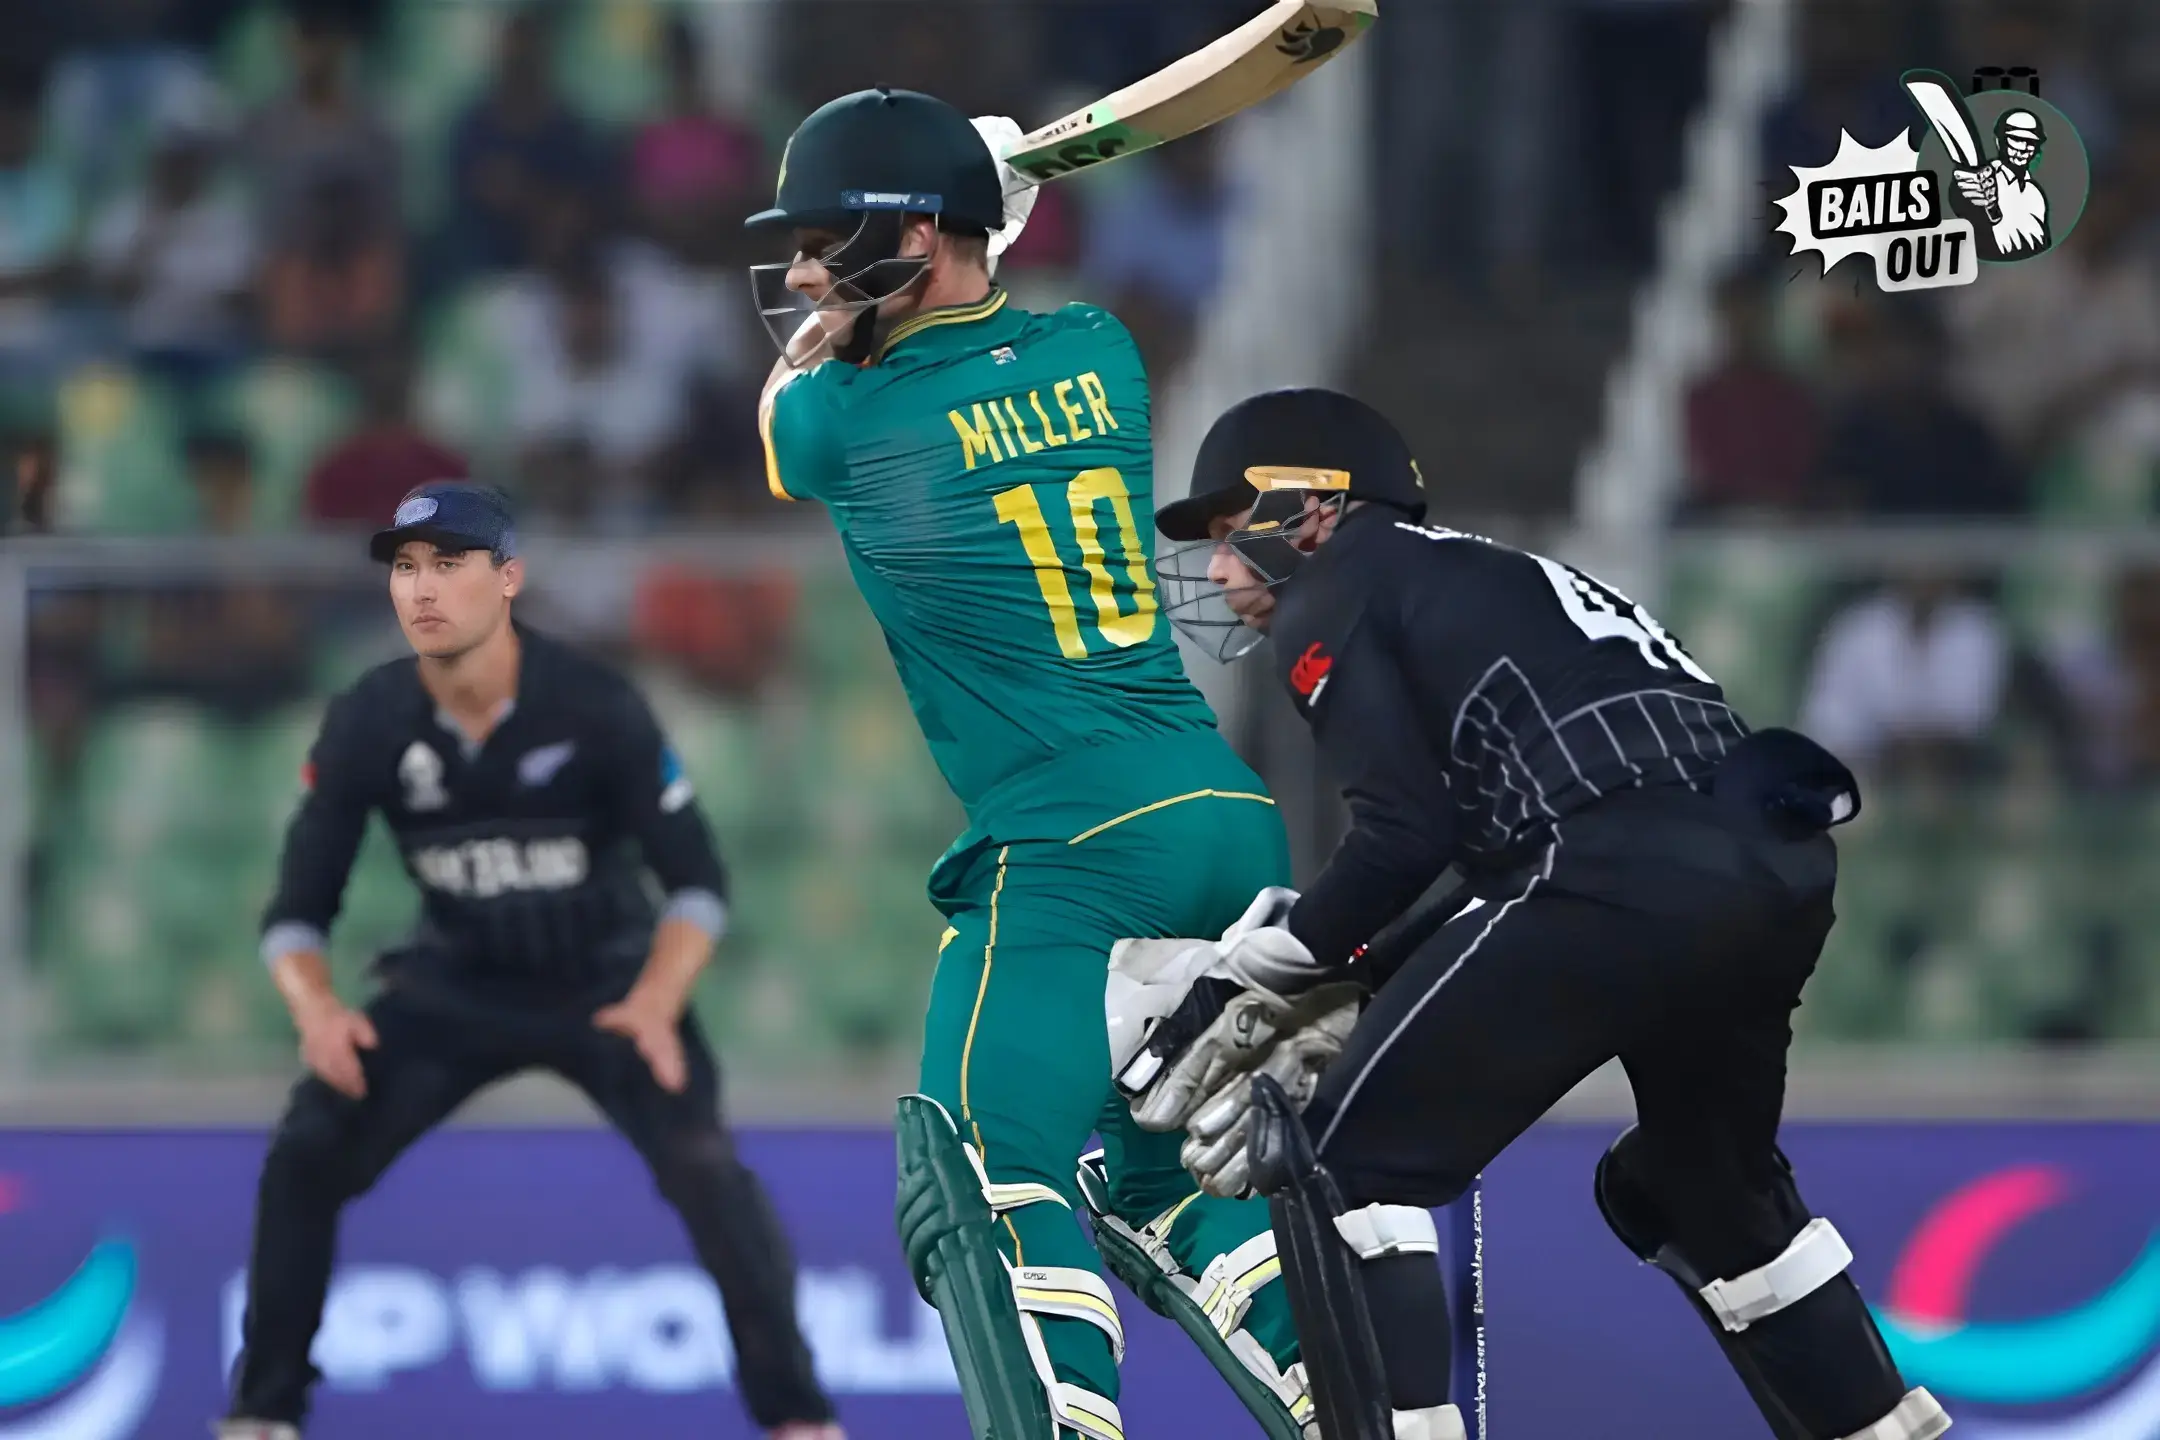 South Africa batting against New Zealand